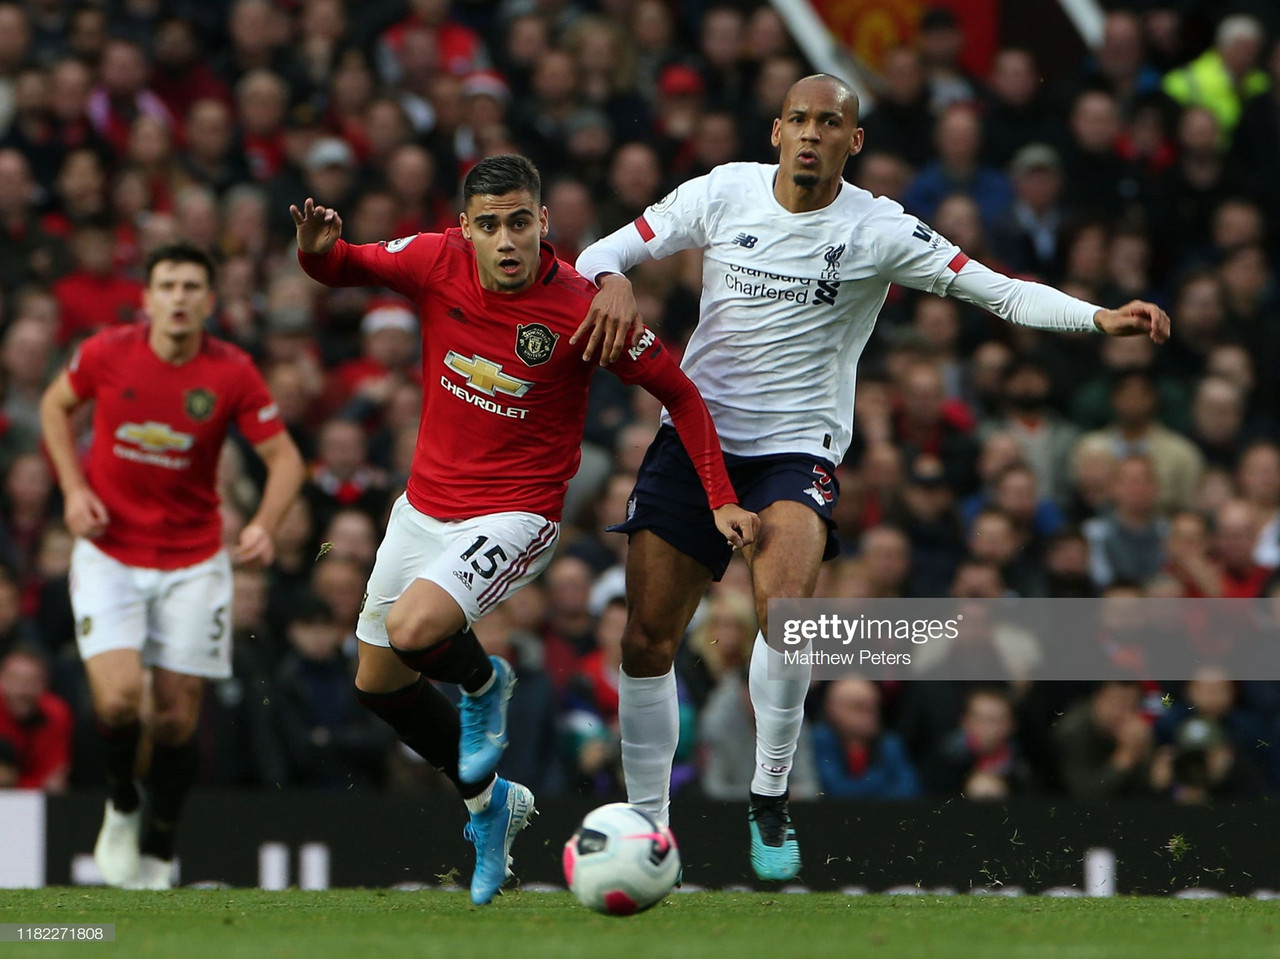 Manchester United: The curious case of Andreas Pereira